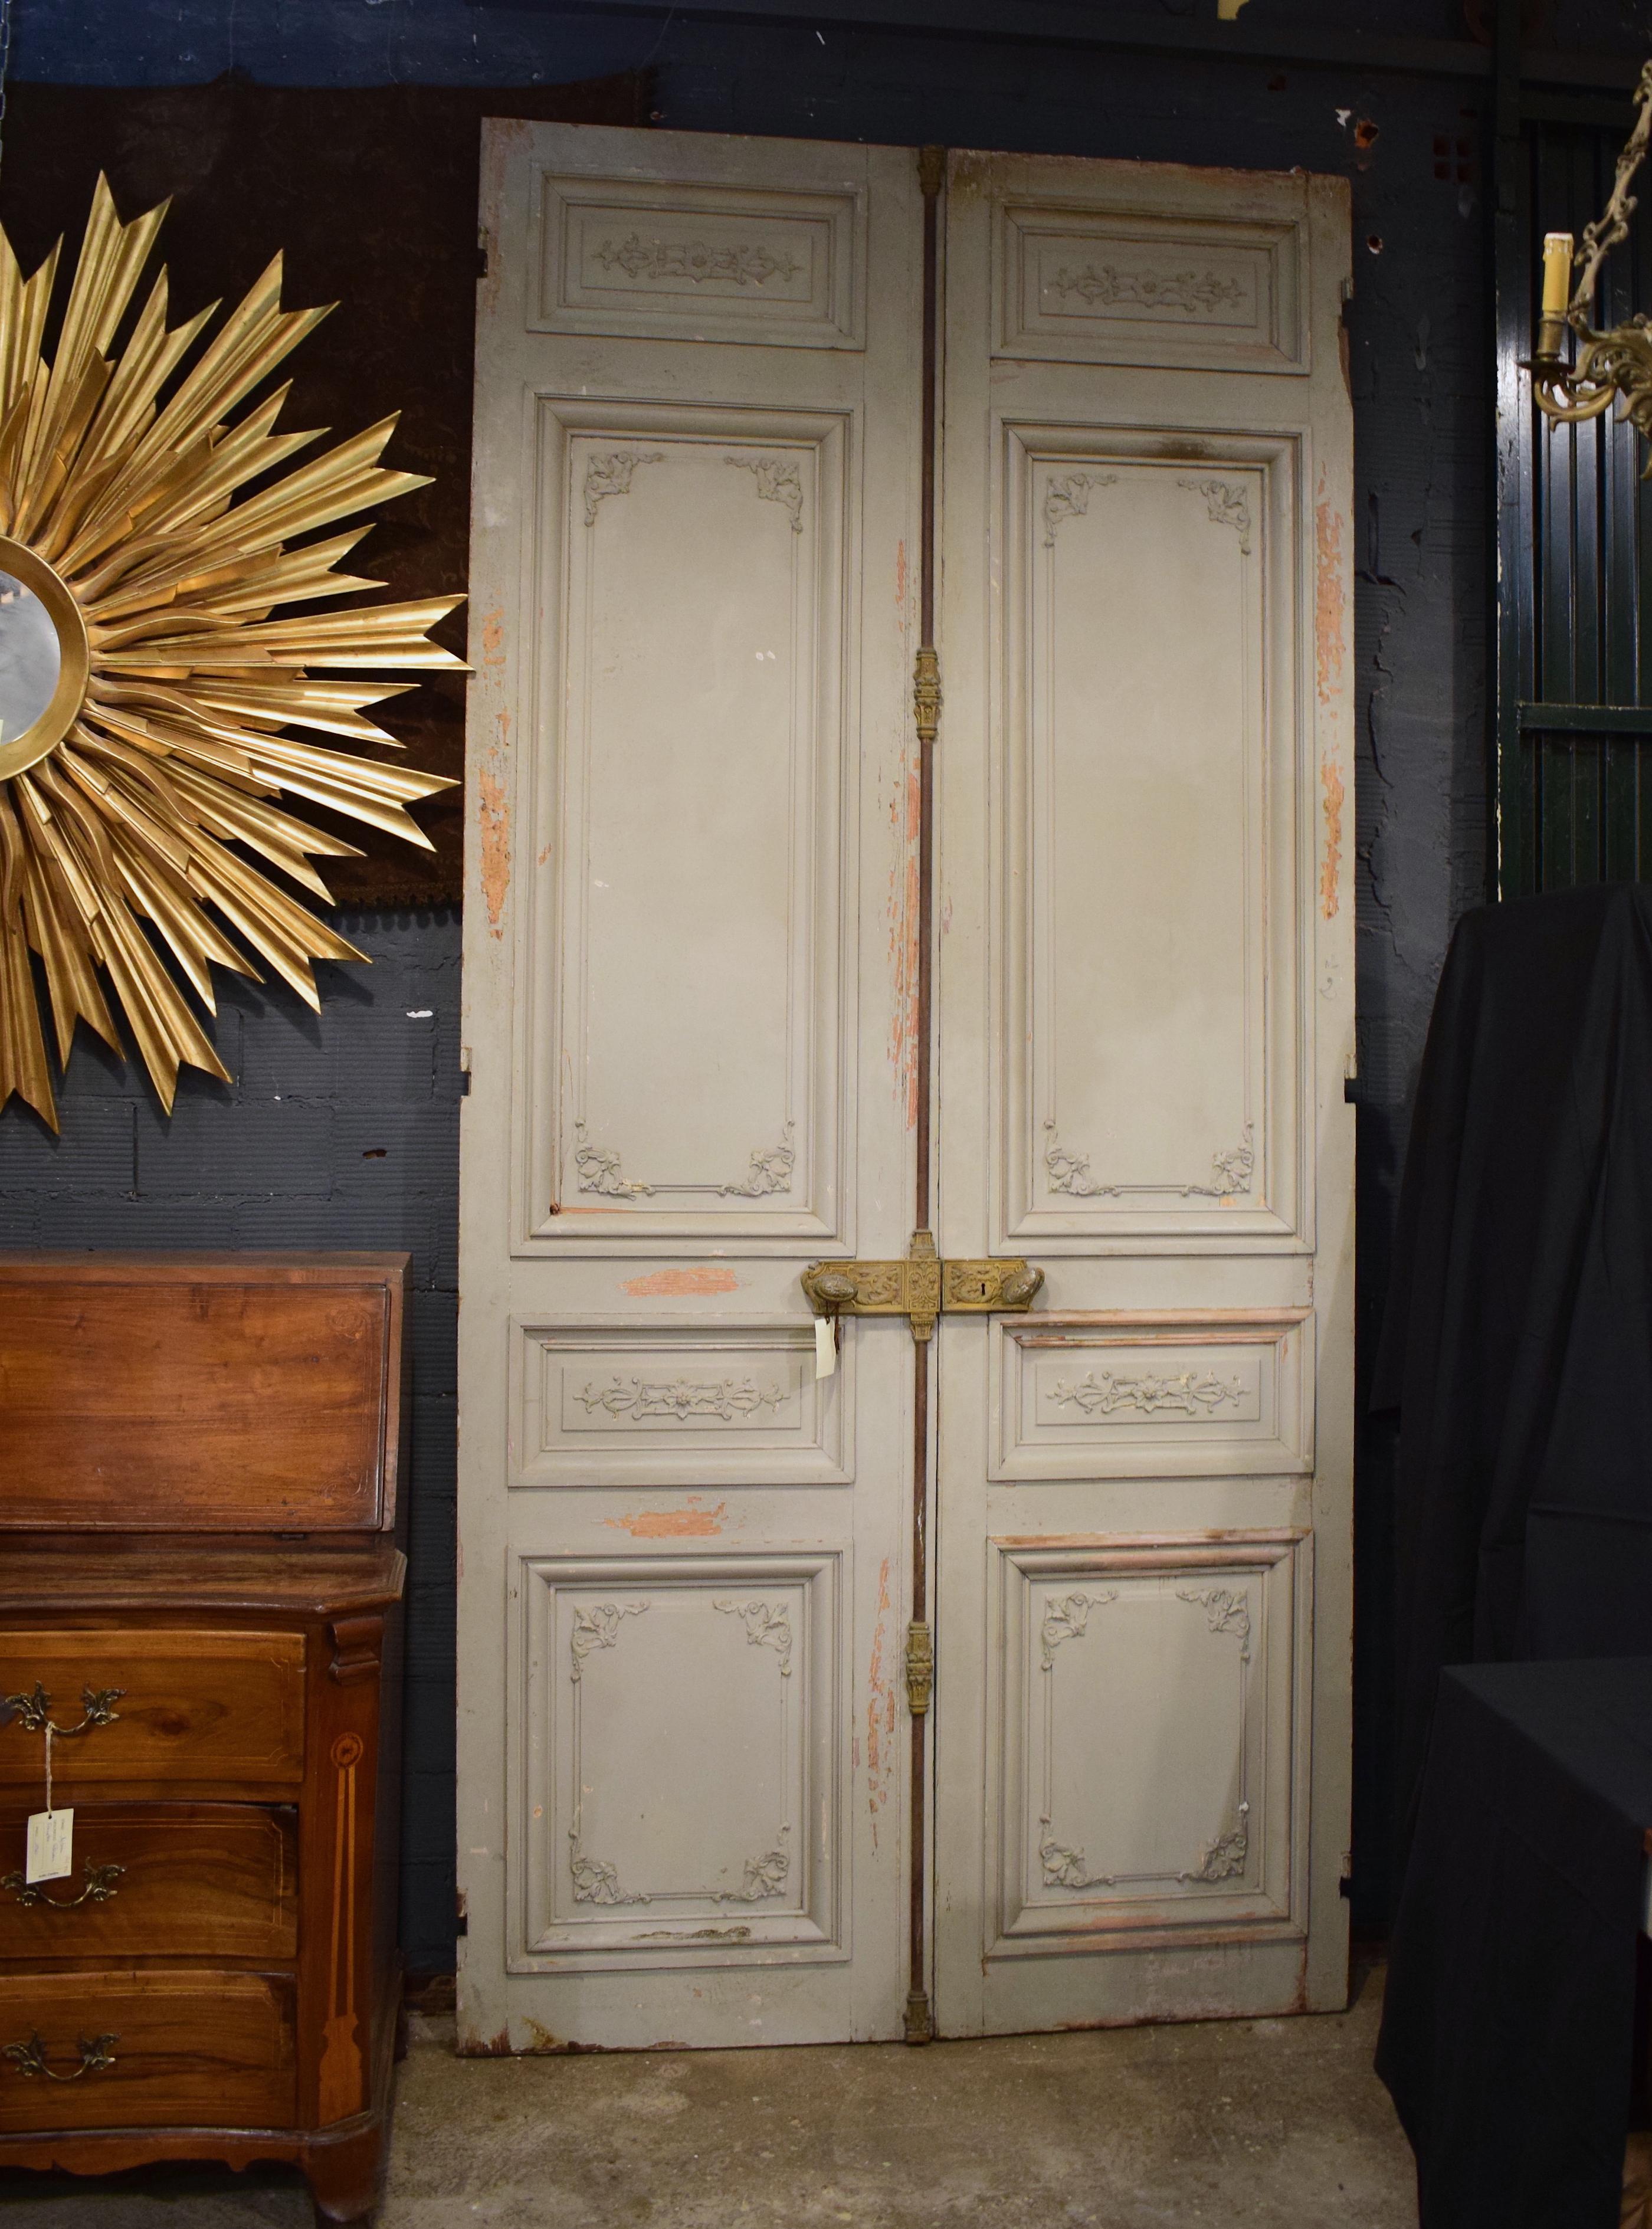 This magnificent set of large exterior double doors are French and from the Napoleon III period. Each panel has hand crafted structural detail of rosettes and flowers carved into them. The doors have their original brass lock intact which has